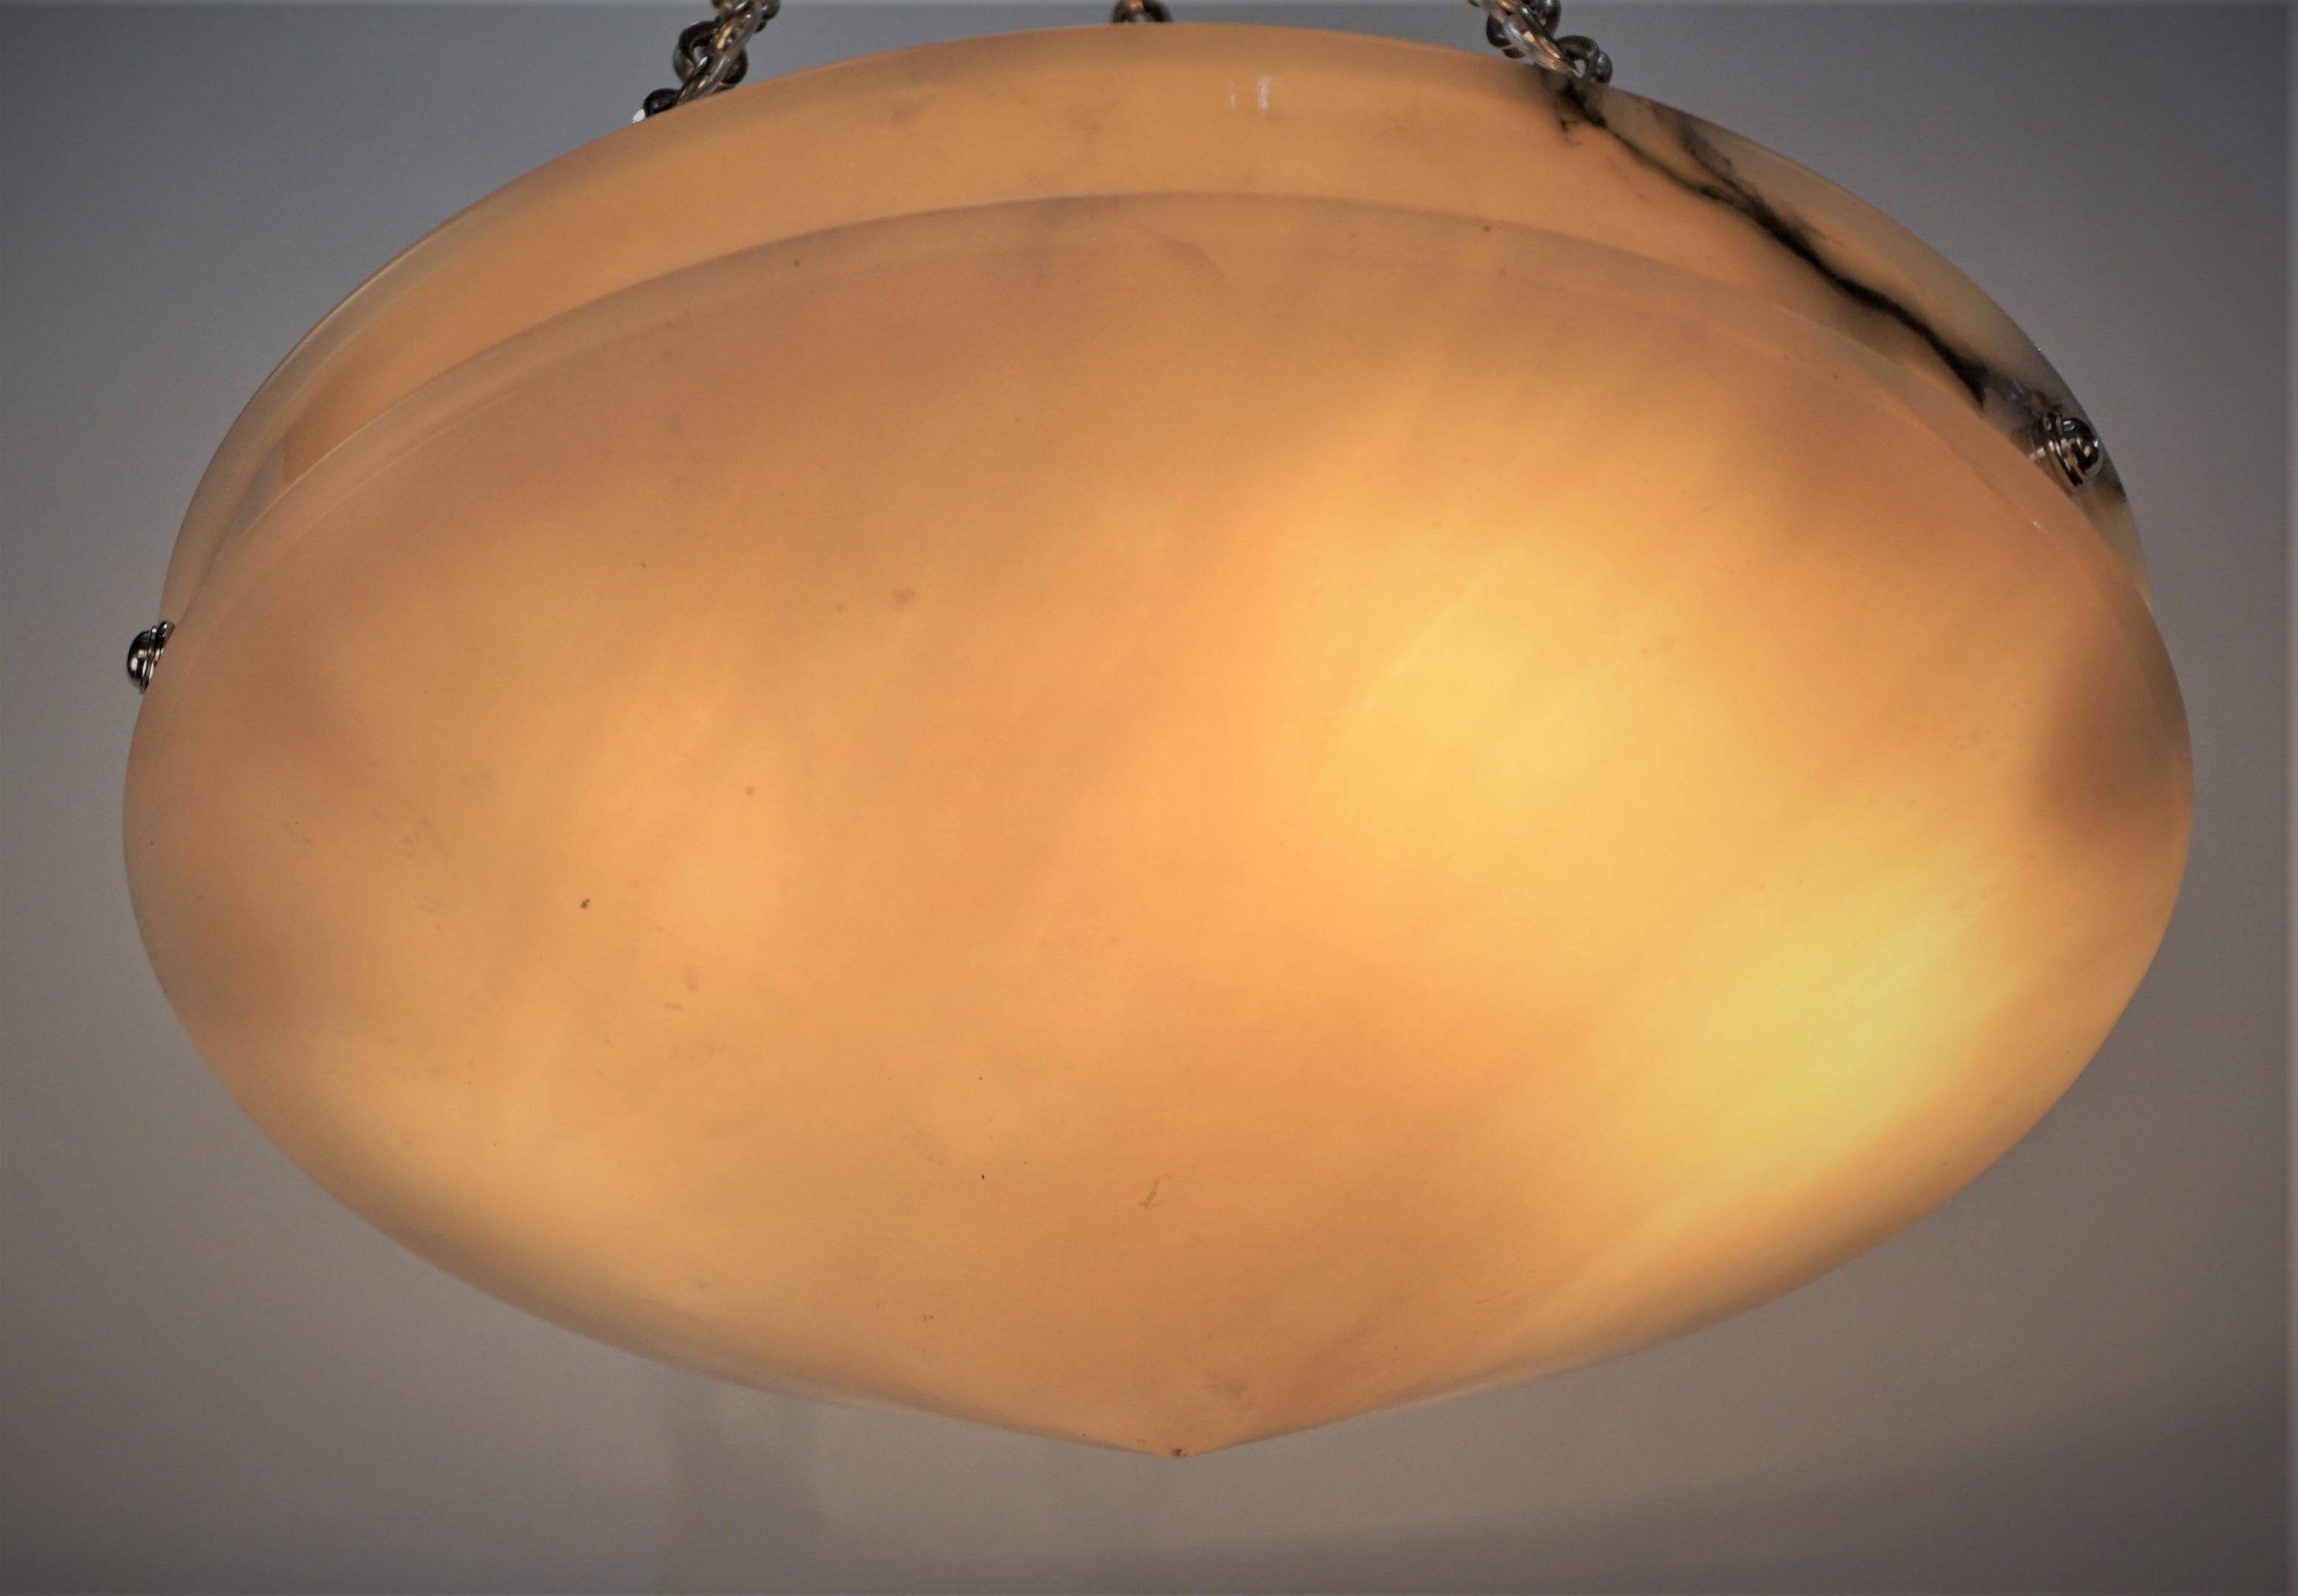 Simple but elegant alabaster chandelier with nickel on bronze chain and canopy.
Six lights, 75watts max each.